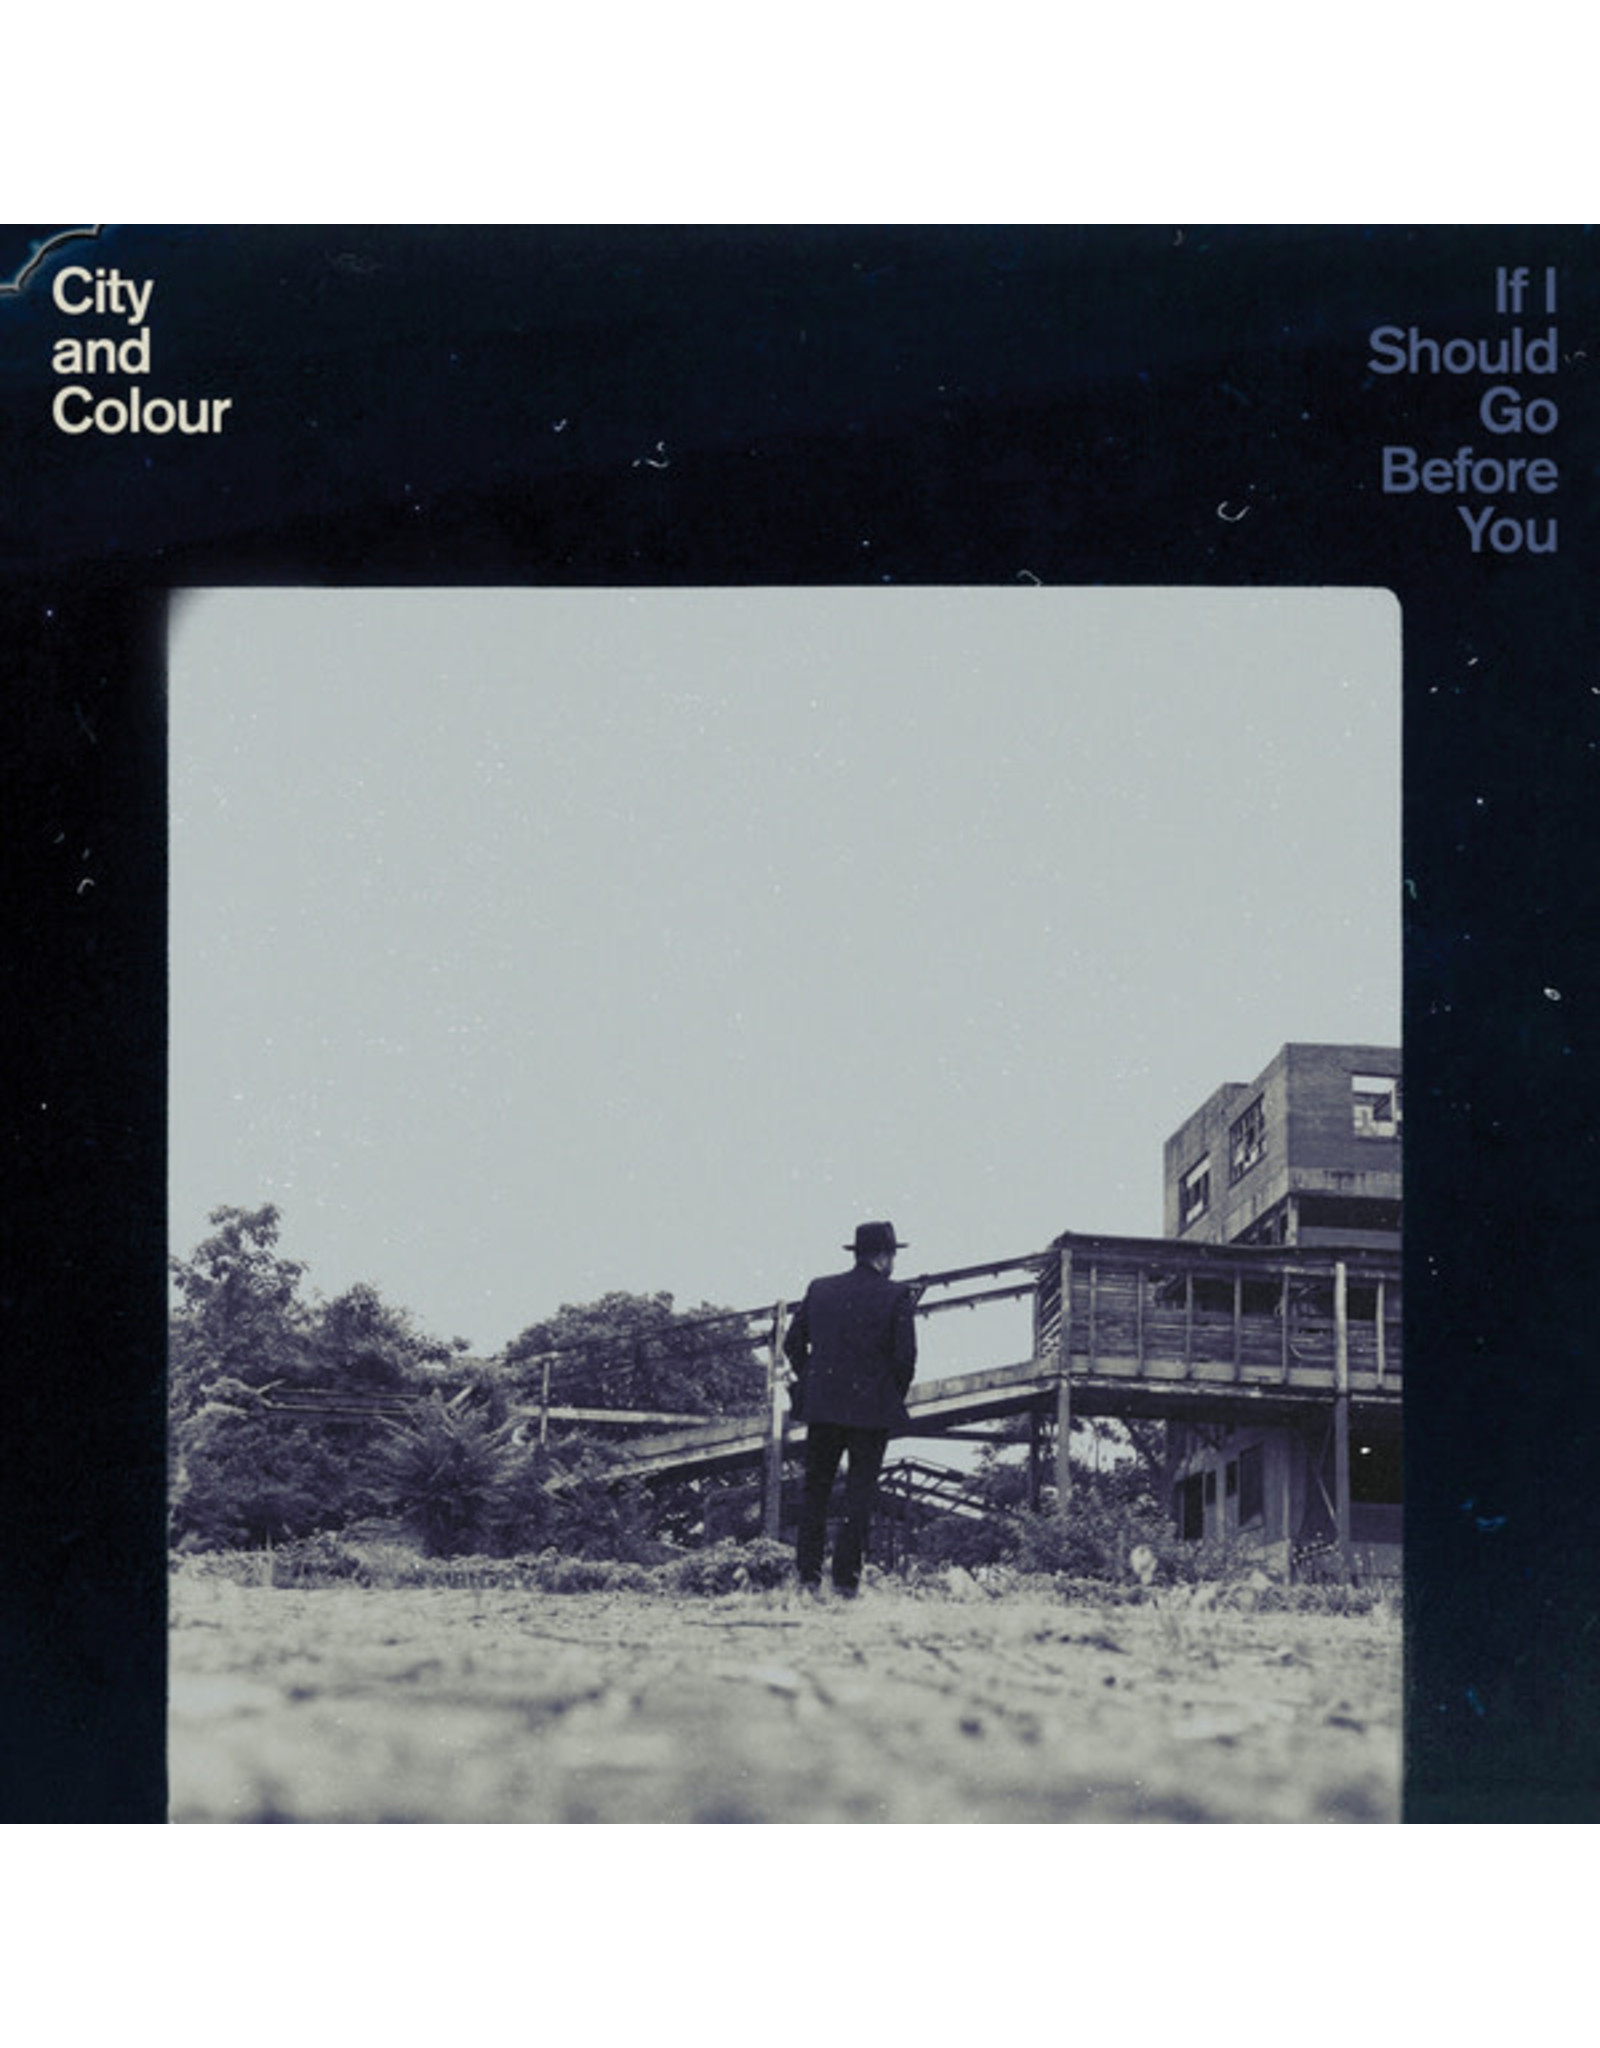 City And Colour - If I Should Go Before You 2LP